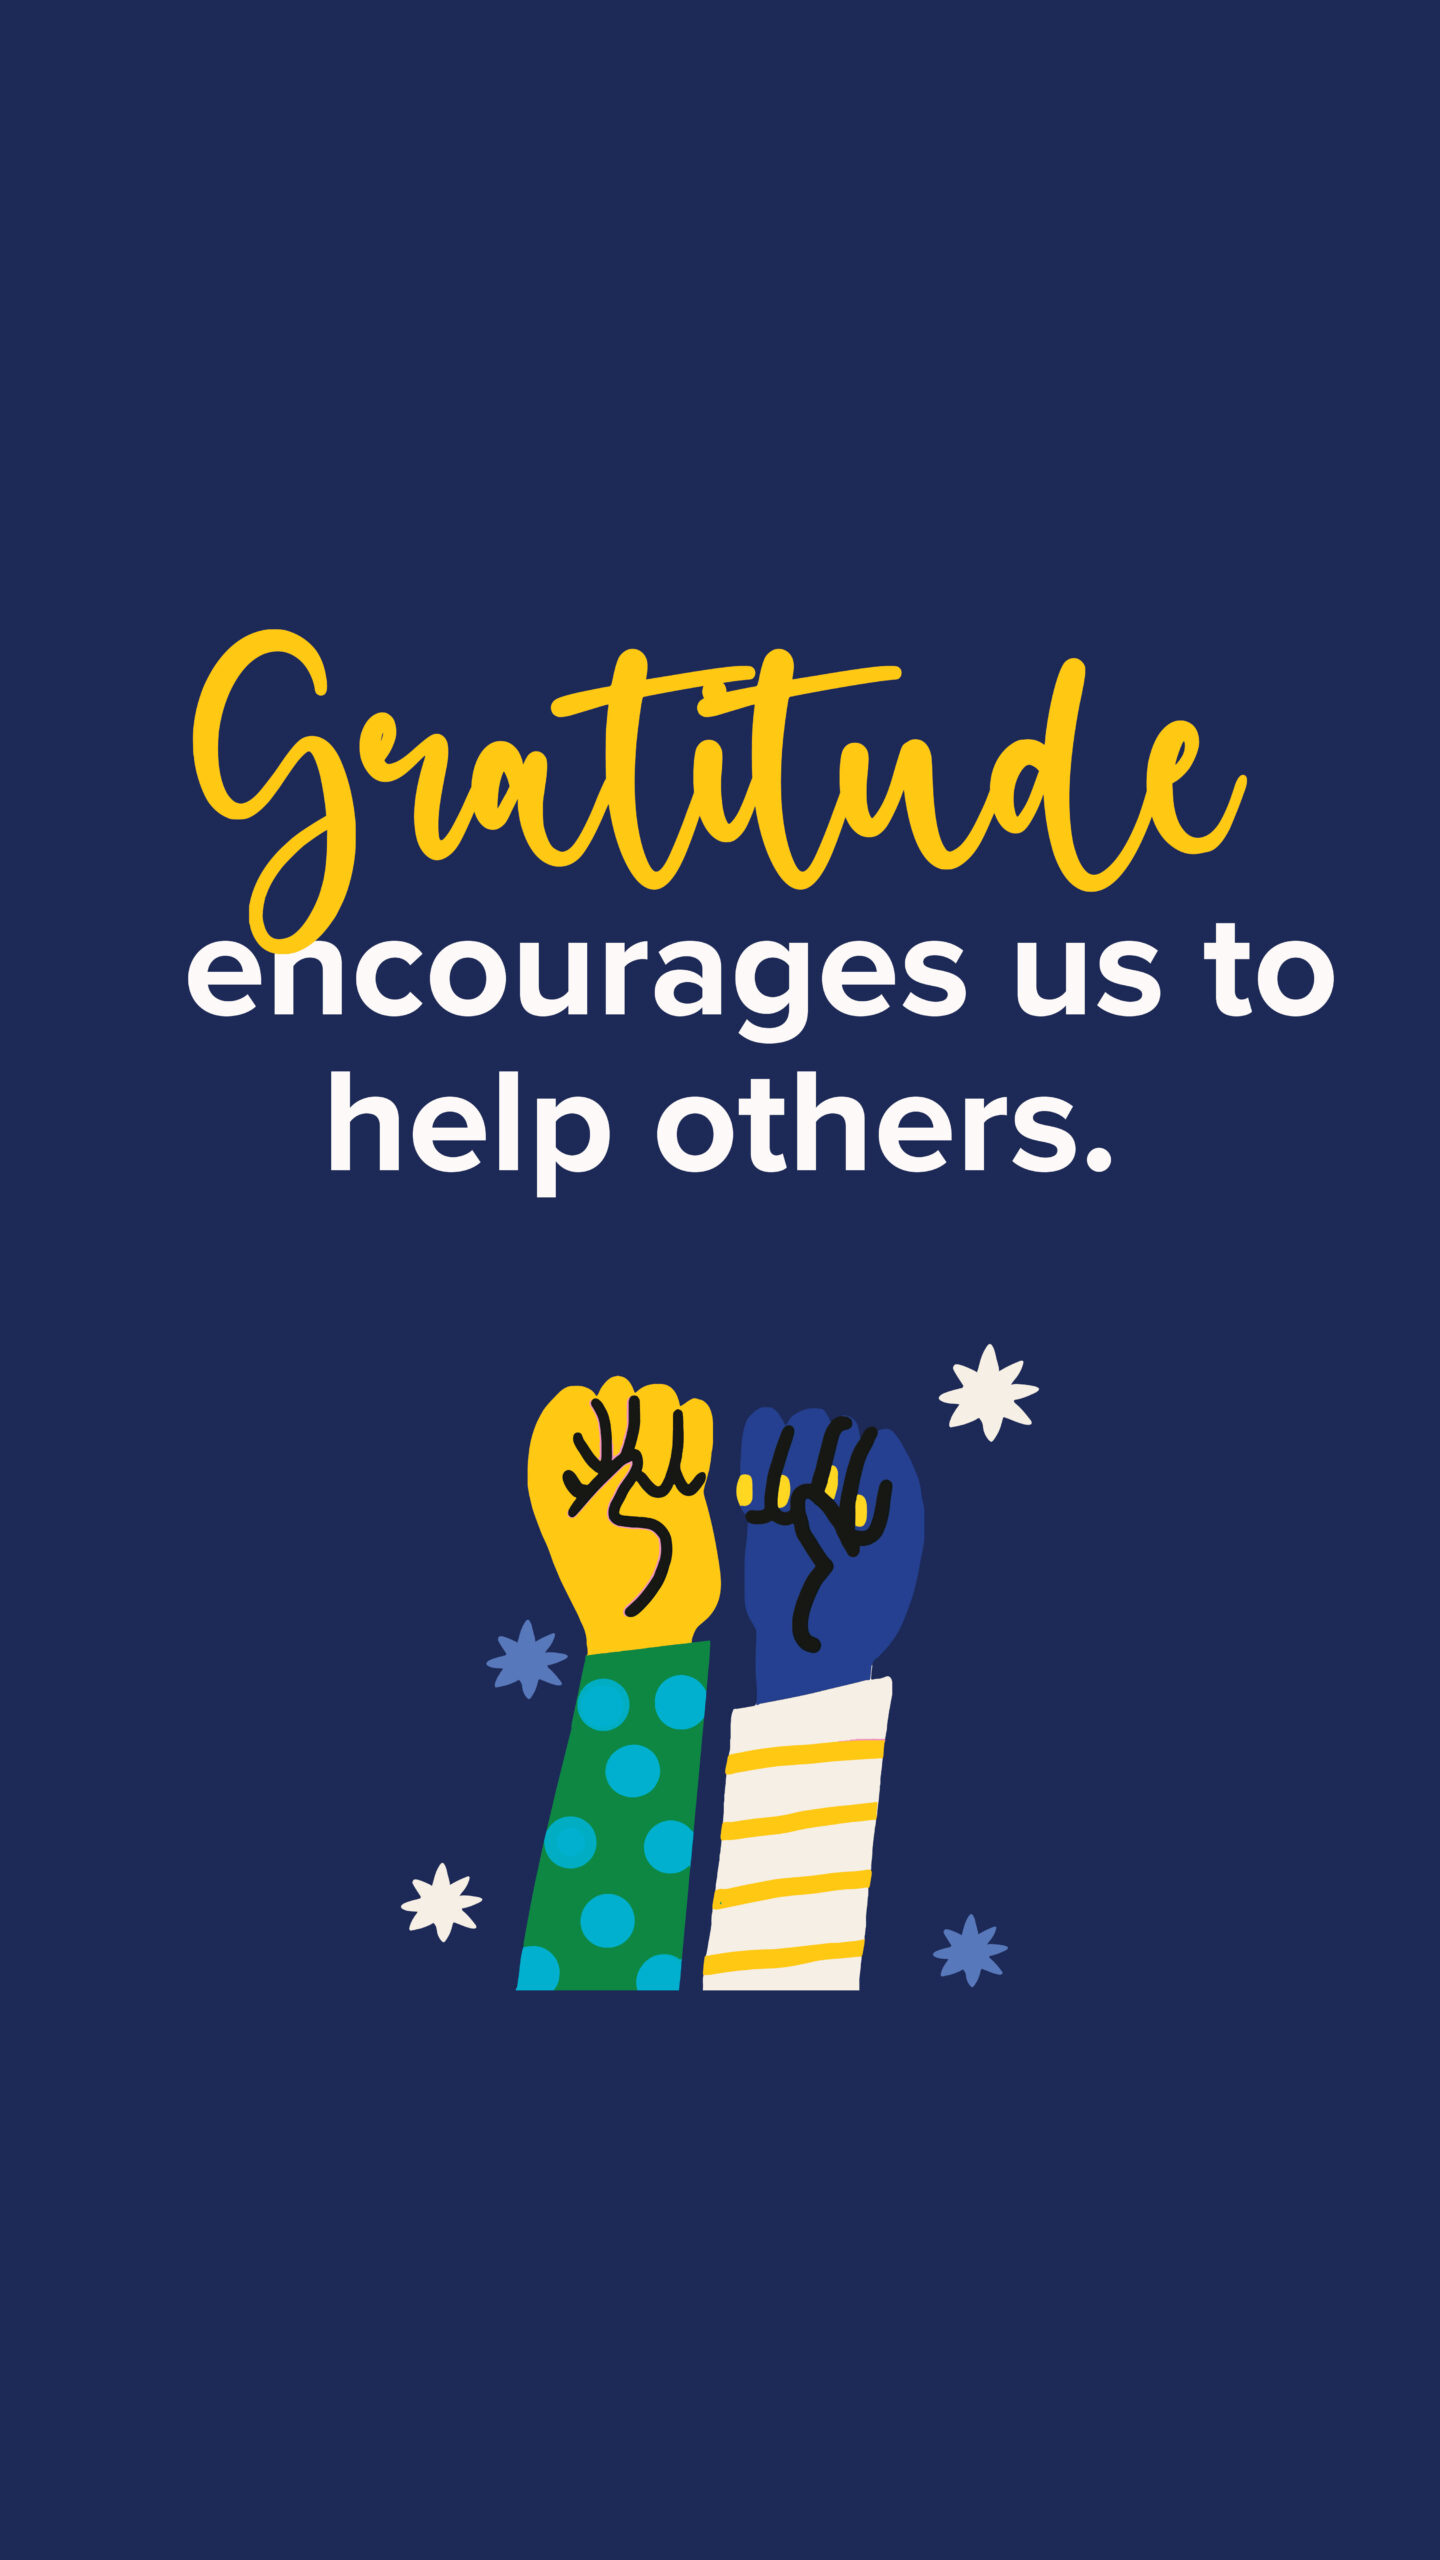 Gratitude encourages us to help others, with illustration of 2 fists up.